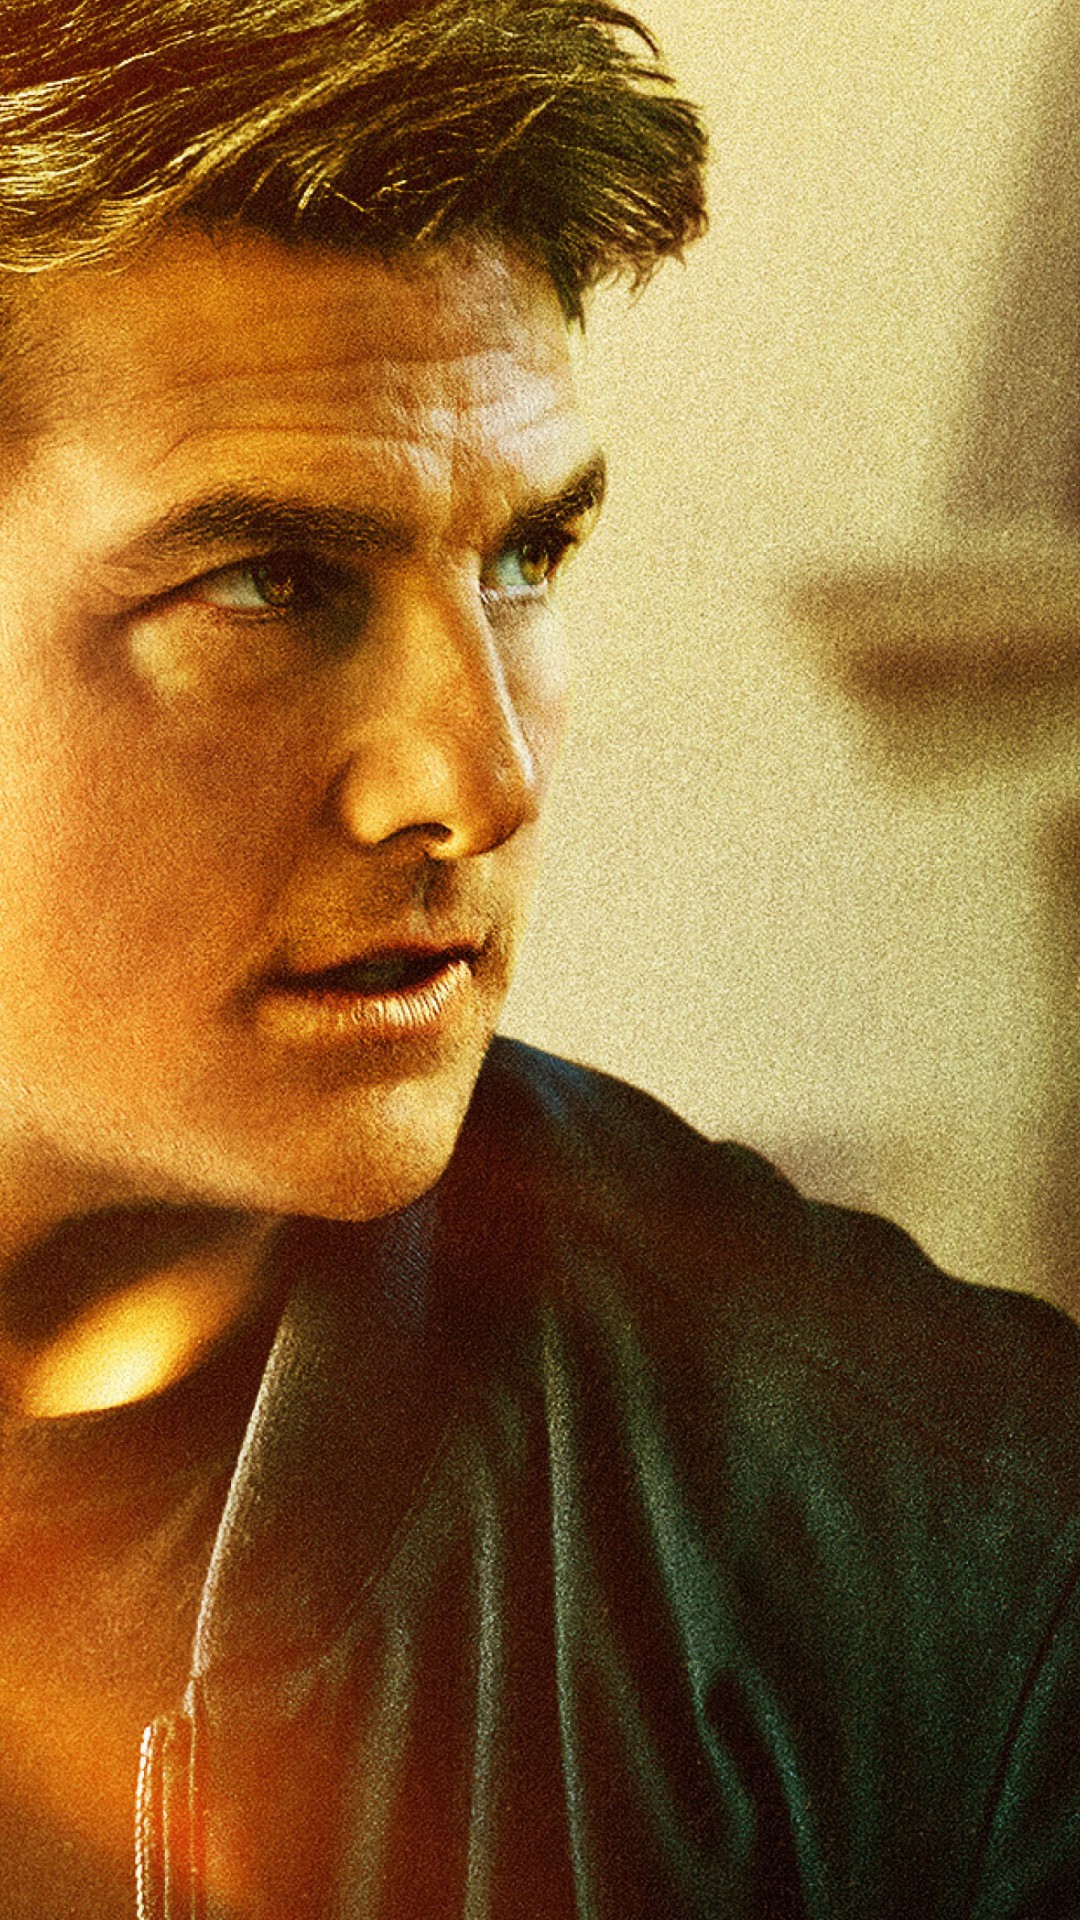 Wallpaper Mission: Impossible, Tom Cruise, 4K, Movies